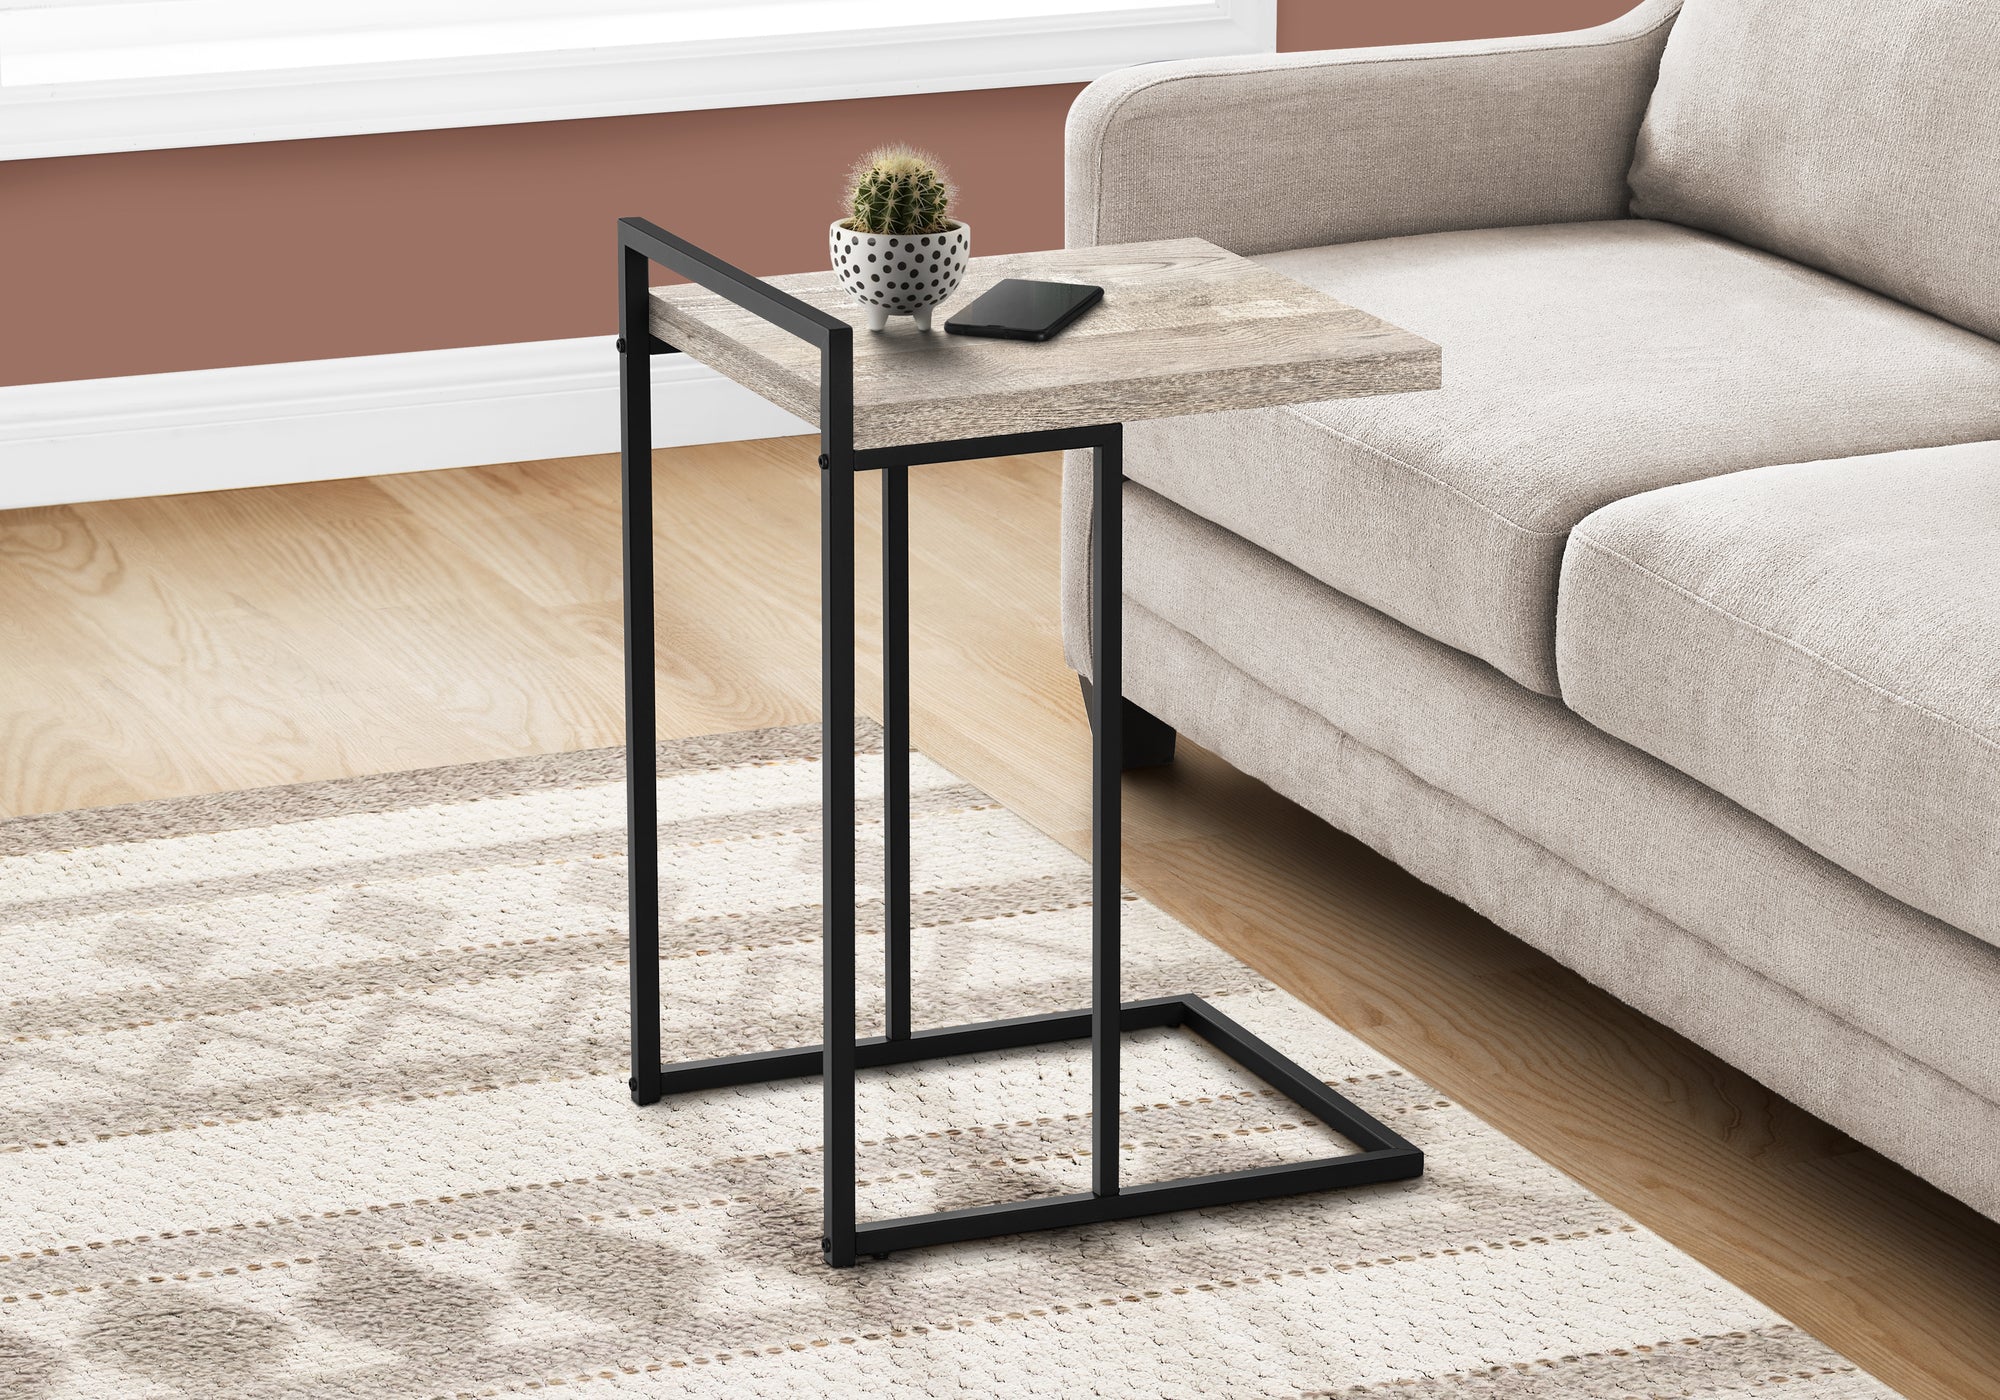 MN-813632    Accent Table, C-Shaped, End, Side, Snack, Living Room, Bedroom, Metal Frame, Laminate, Taupe Reclaimed Wood Look, Black, Contemporary, Industrial, Modern